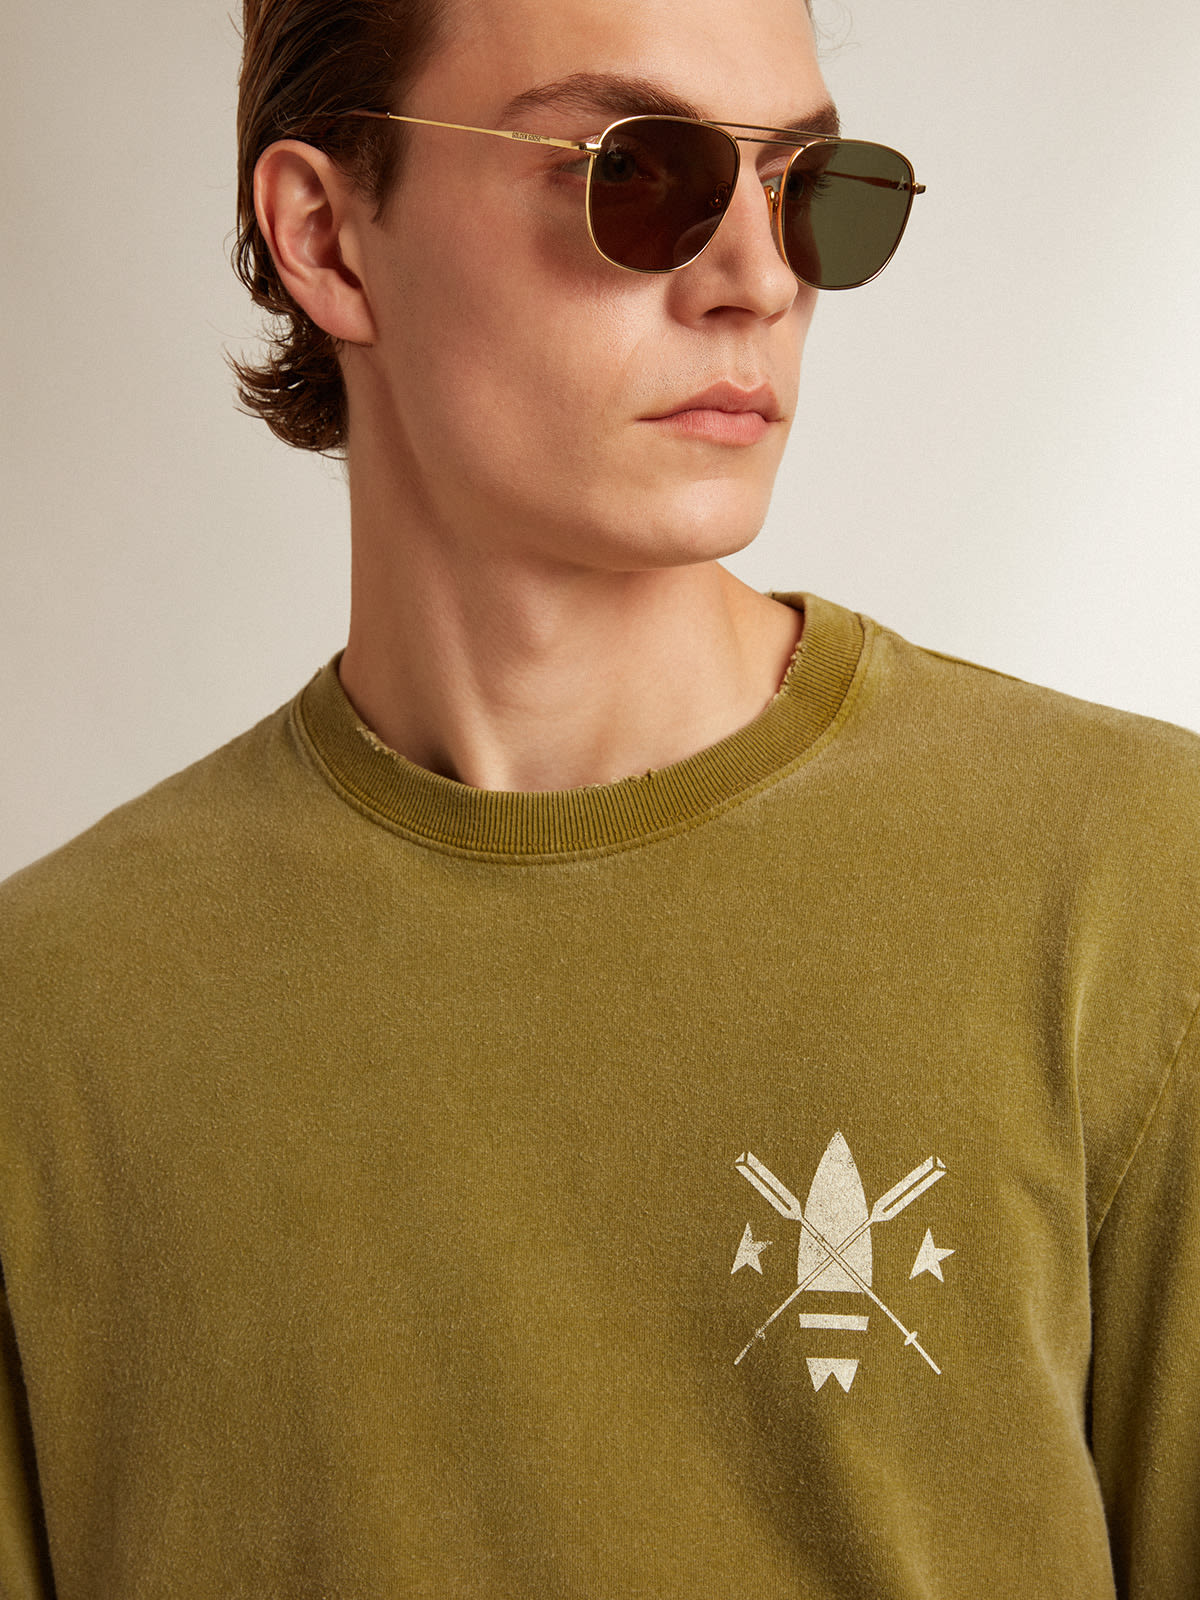 Golden Goose - Pesto-green T-shirt with white logo on the front and back in 